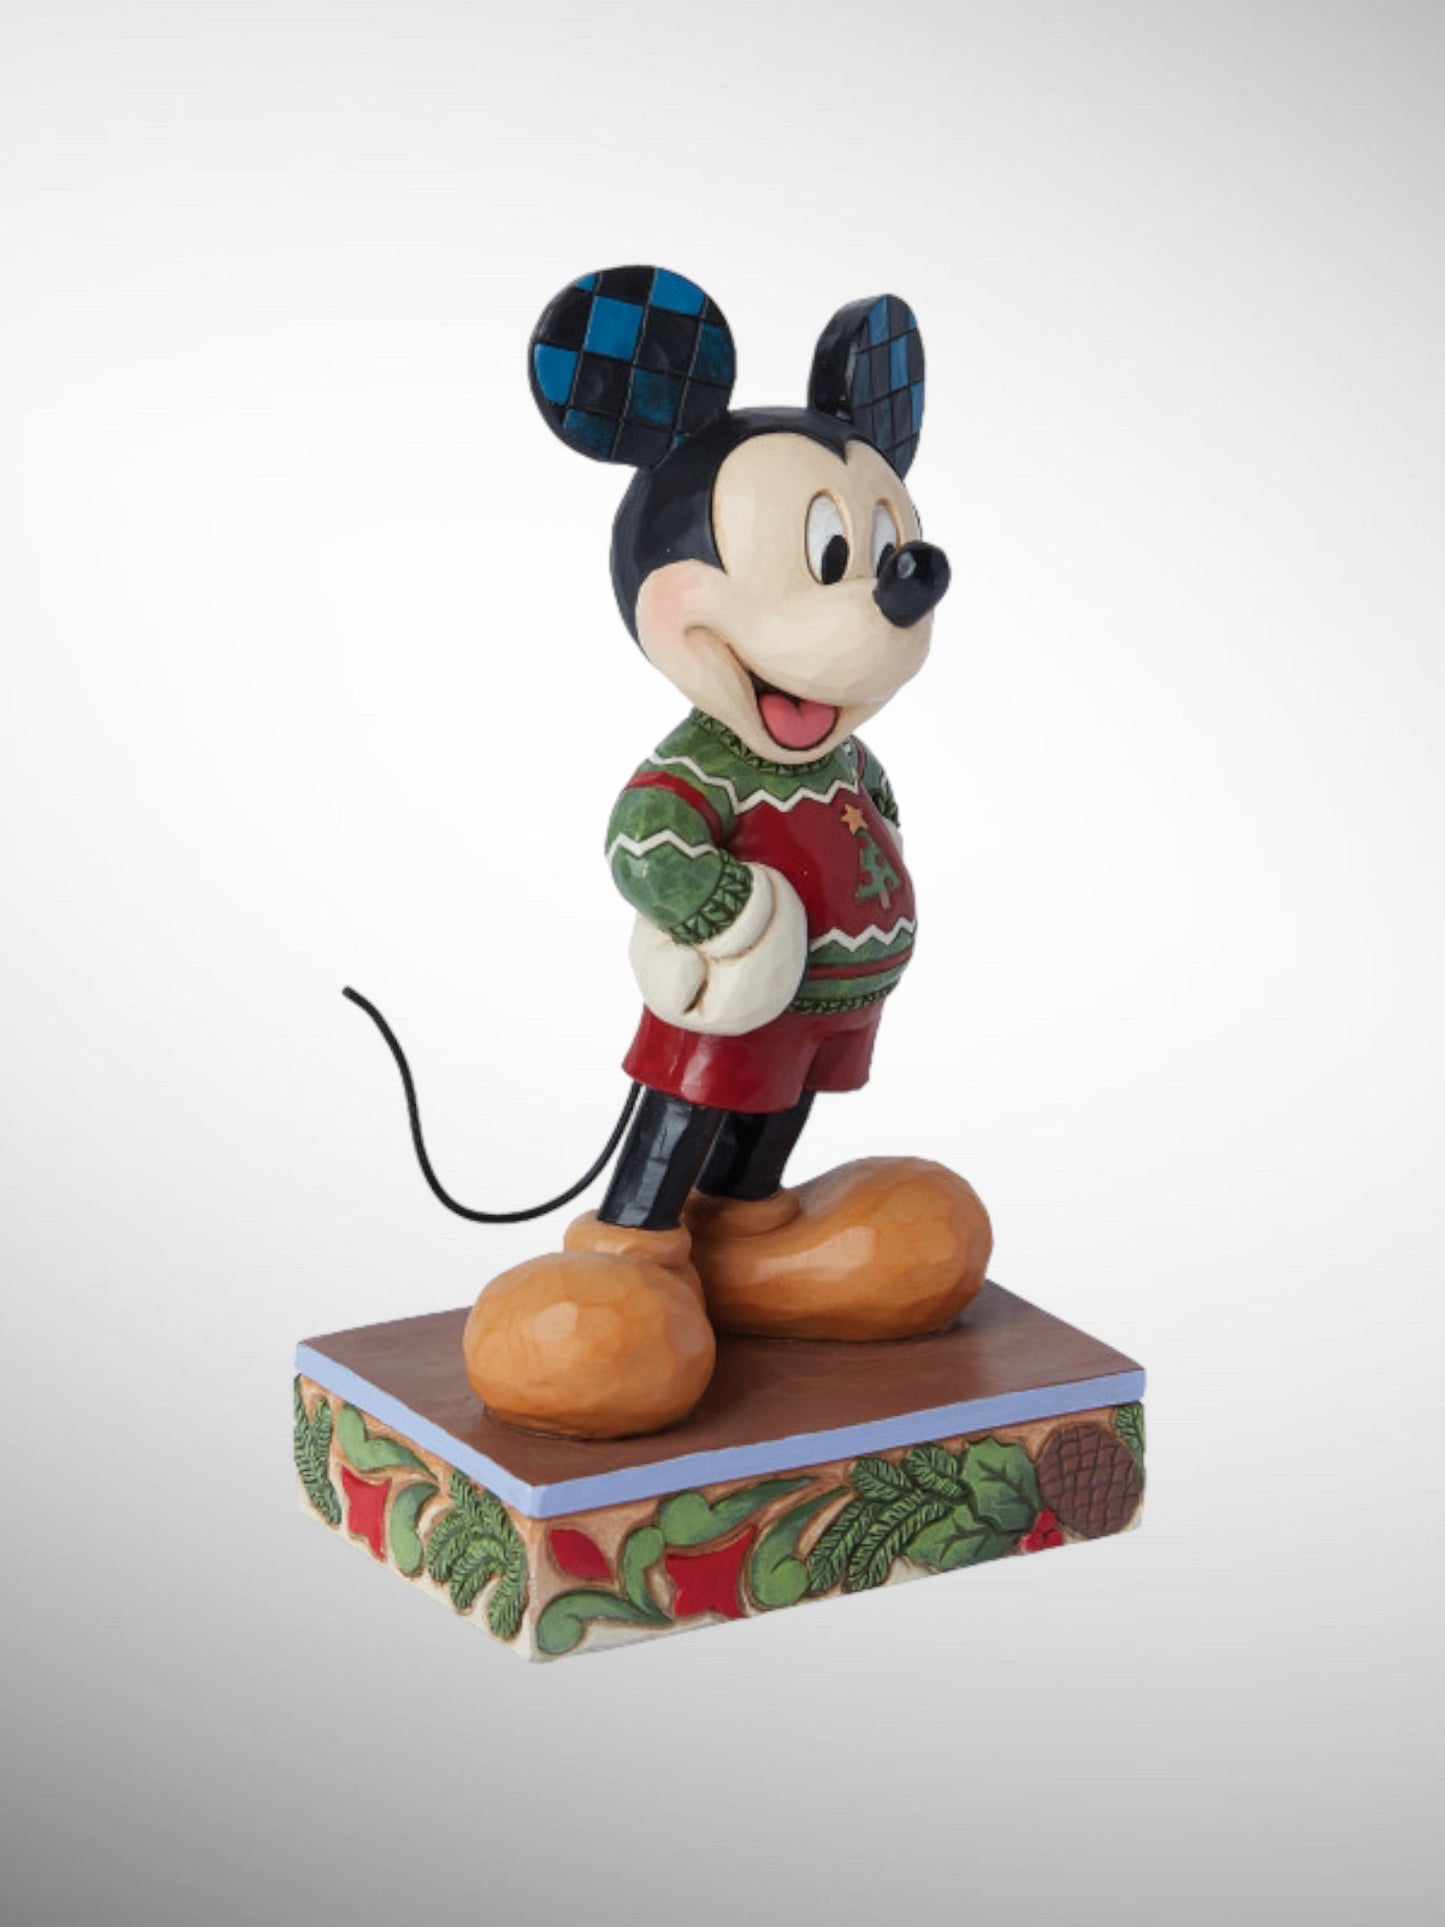 Jim Shore Disney Traditions - All Decked Out Mickey Ugly Sweater Christmas Figurine - PREORDER